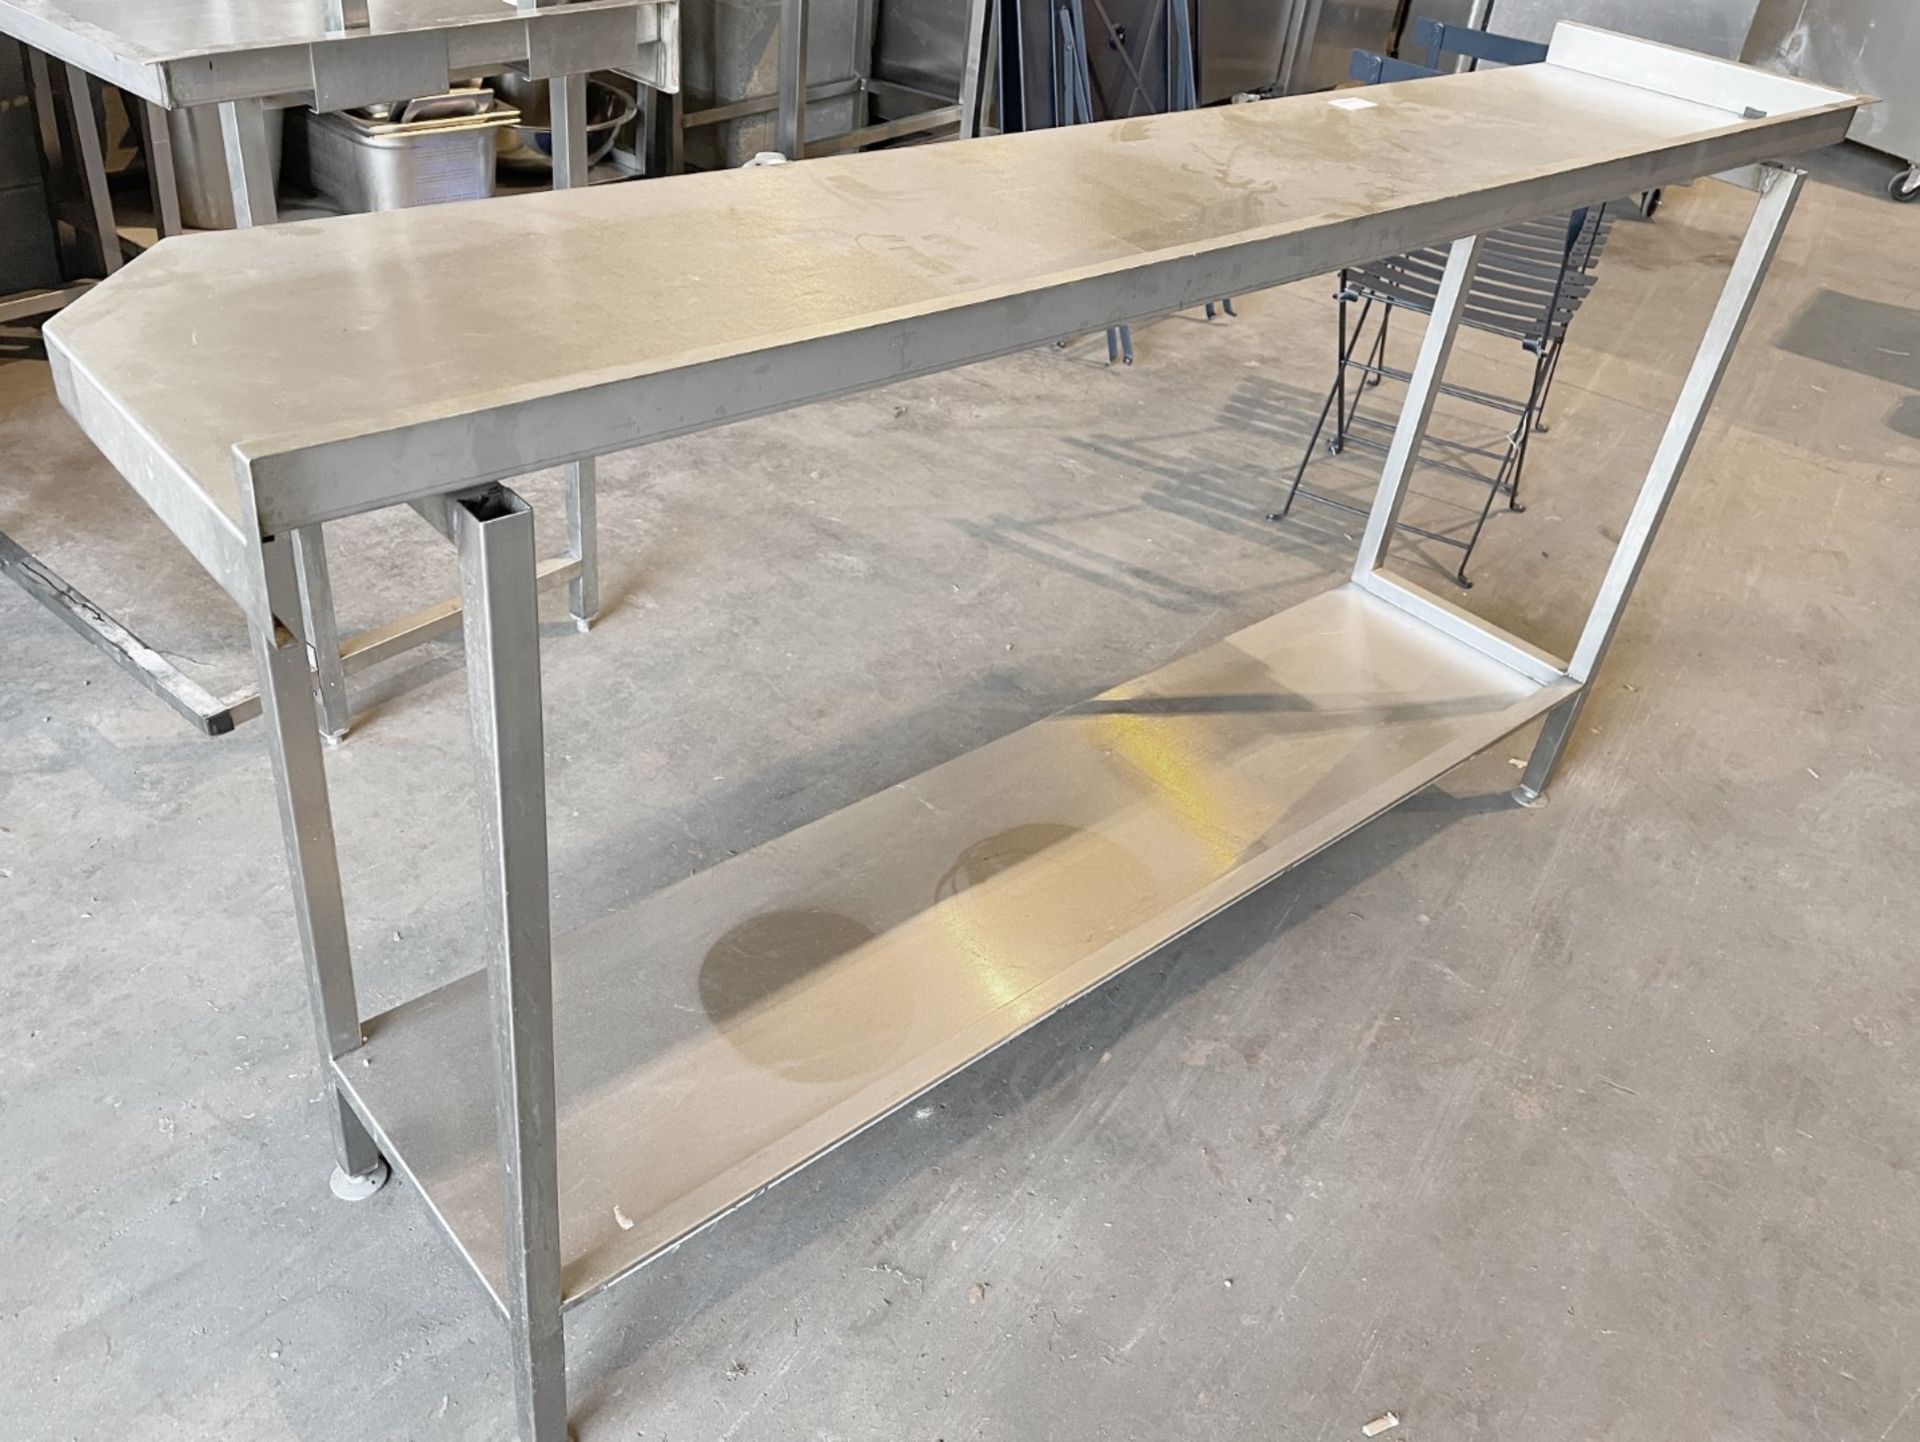 1 x Narrow Stainless Steel Prep Table - Approx 180X40X90Cm - Ref: FGN046 - CL834 - Location: Essex, - Image 4 of 4